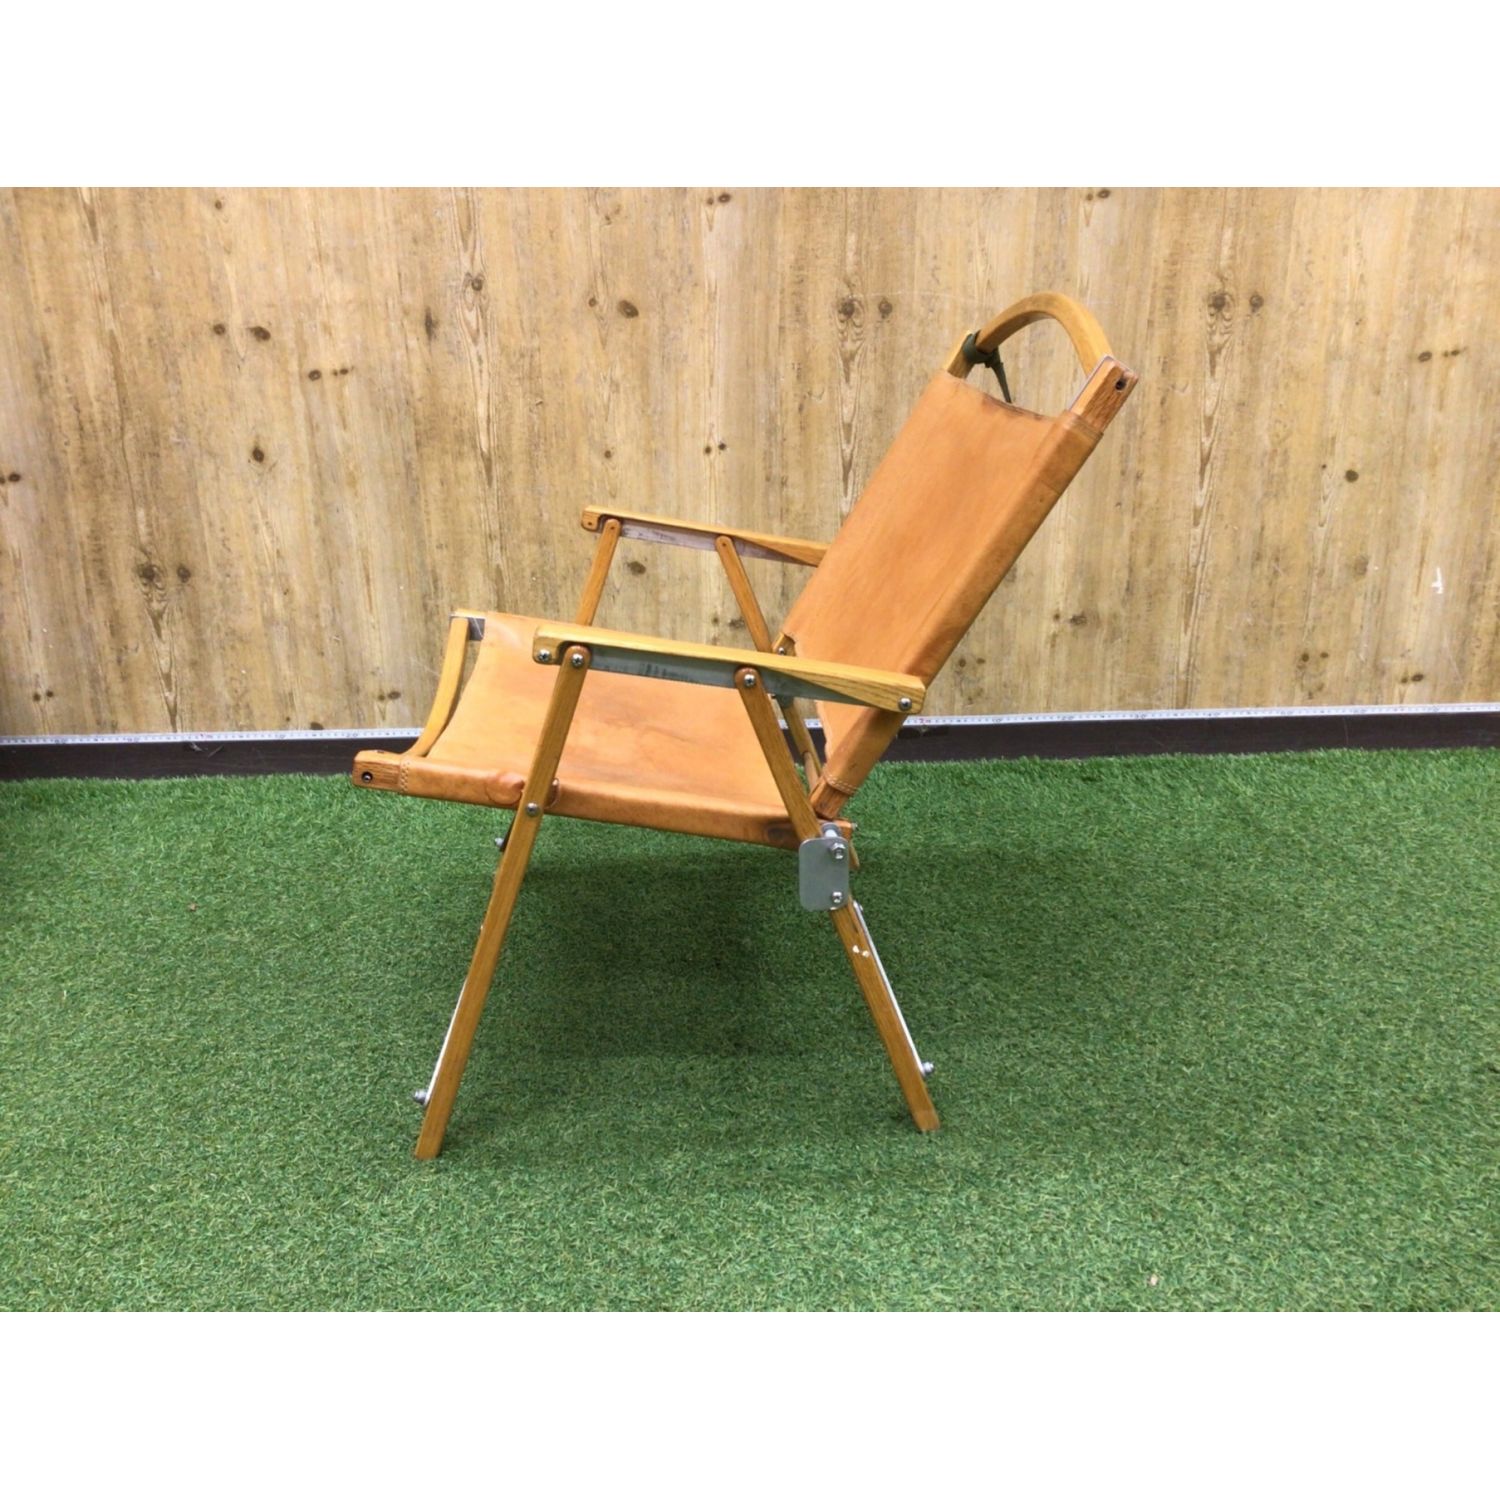 Kermit chair (カーミットチェア) カーミットチェア オーク キャメル